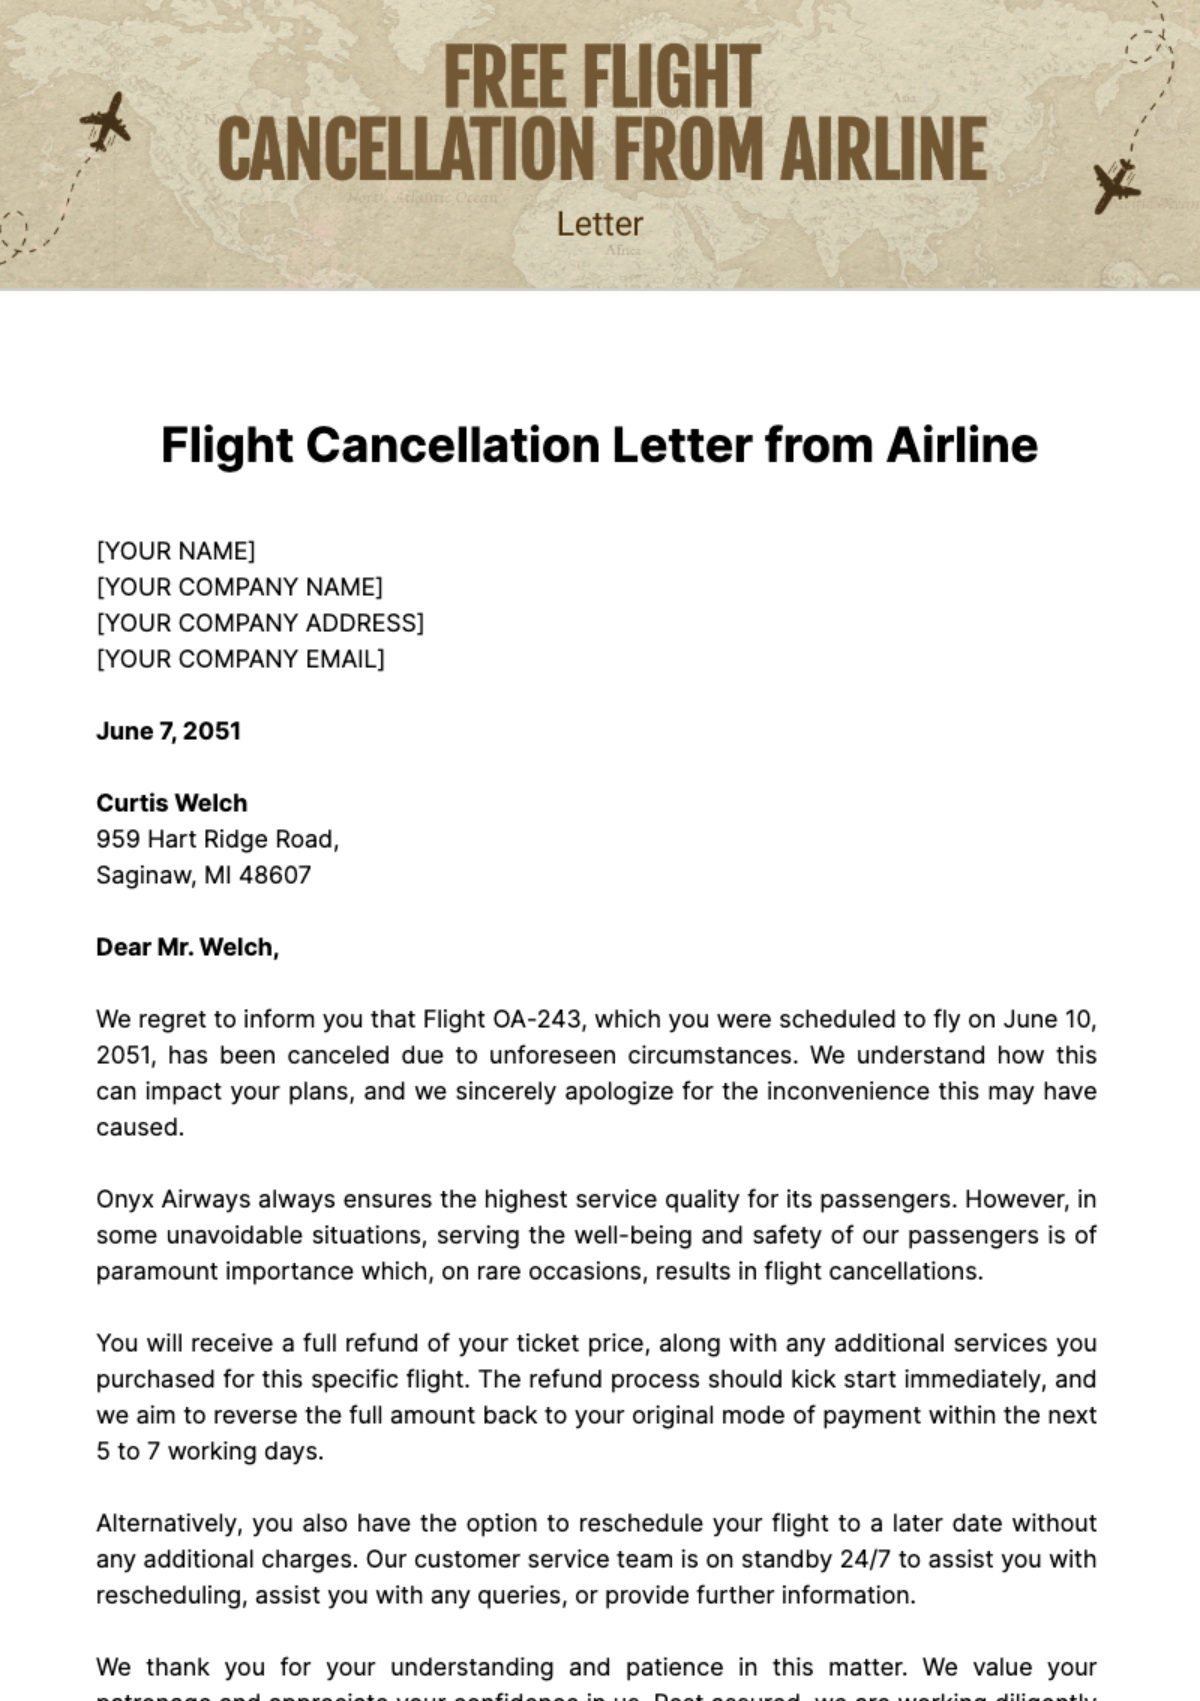 Free Flight Cancellation Letter from Airline Template